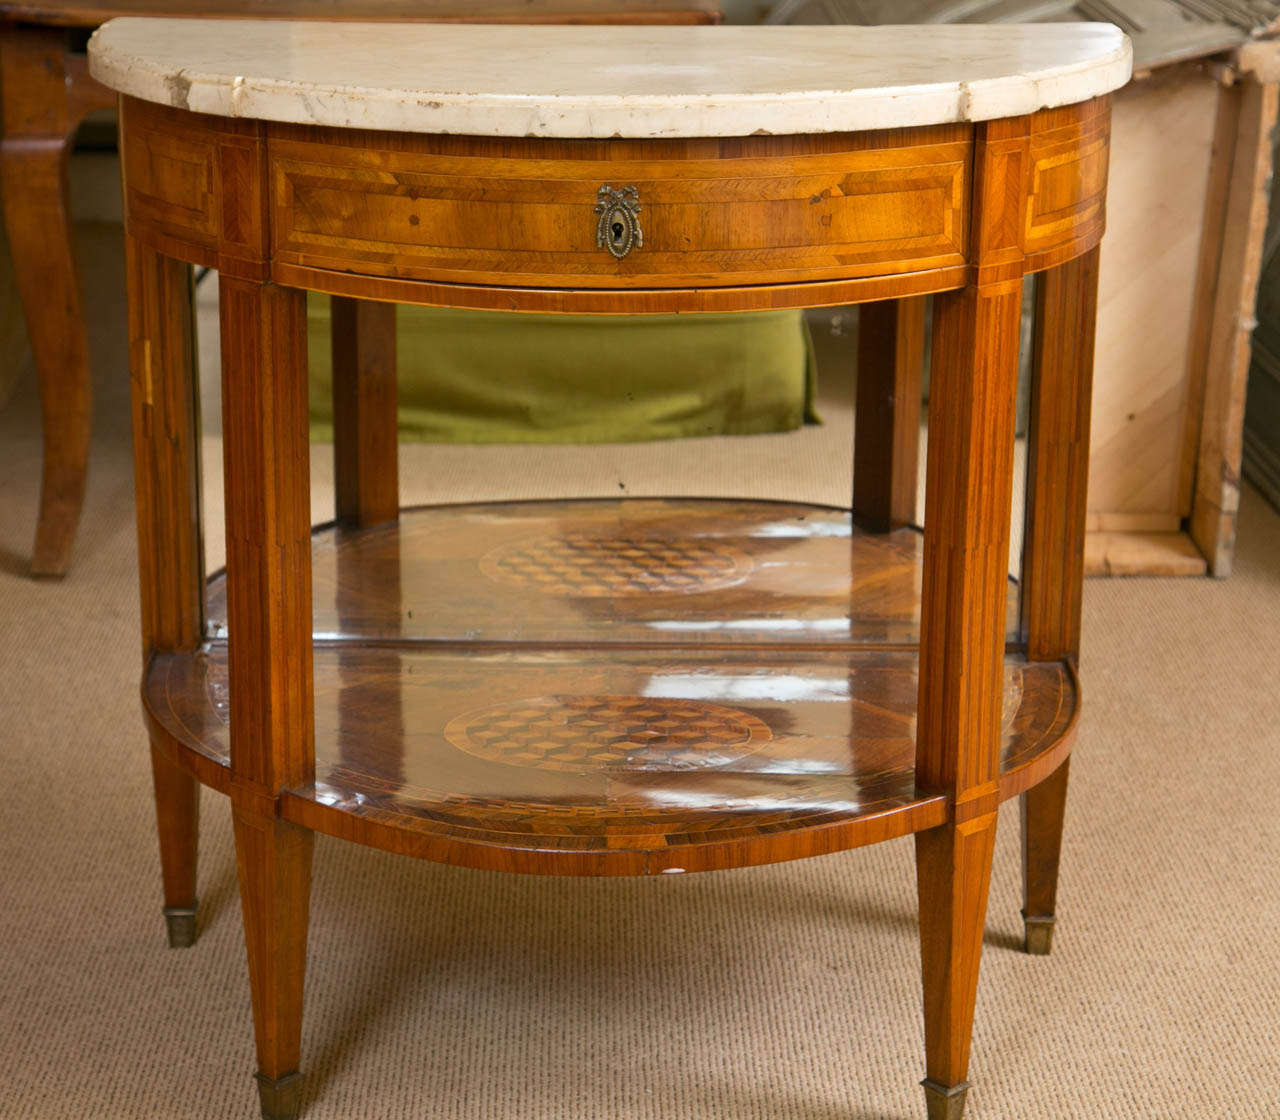 Continental Marquetry and Inlaid Demilune Marble Topped Entry Table, French or Italian, early 19 century, in the Directoire style, the lower tier with a marquetry design, with an added mirror on the back, all above one drawer, and a shaped white